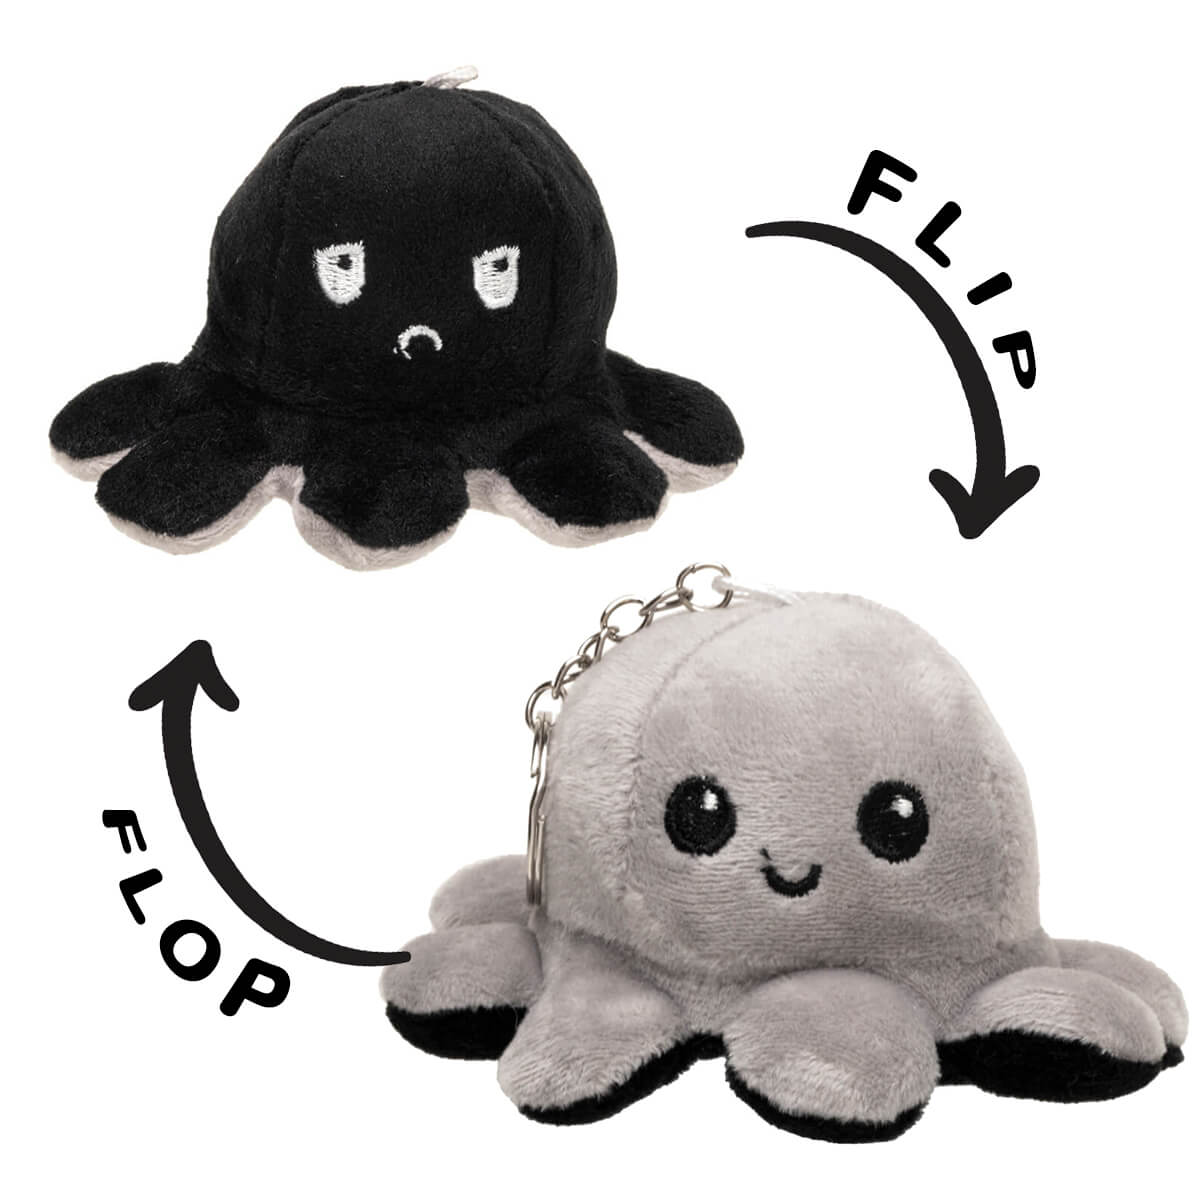 Flipflop mood with octopus keychain